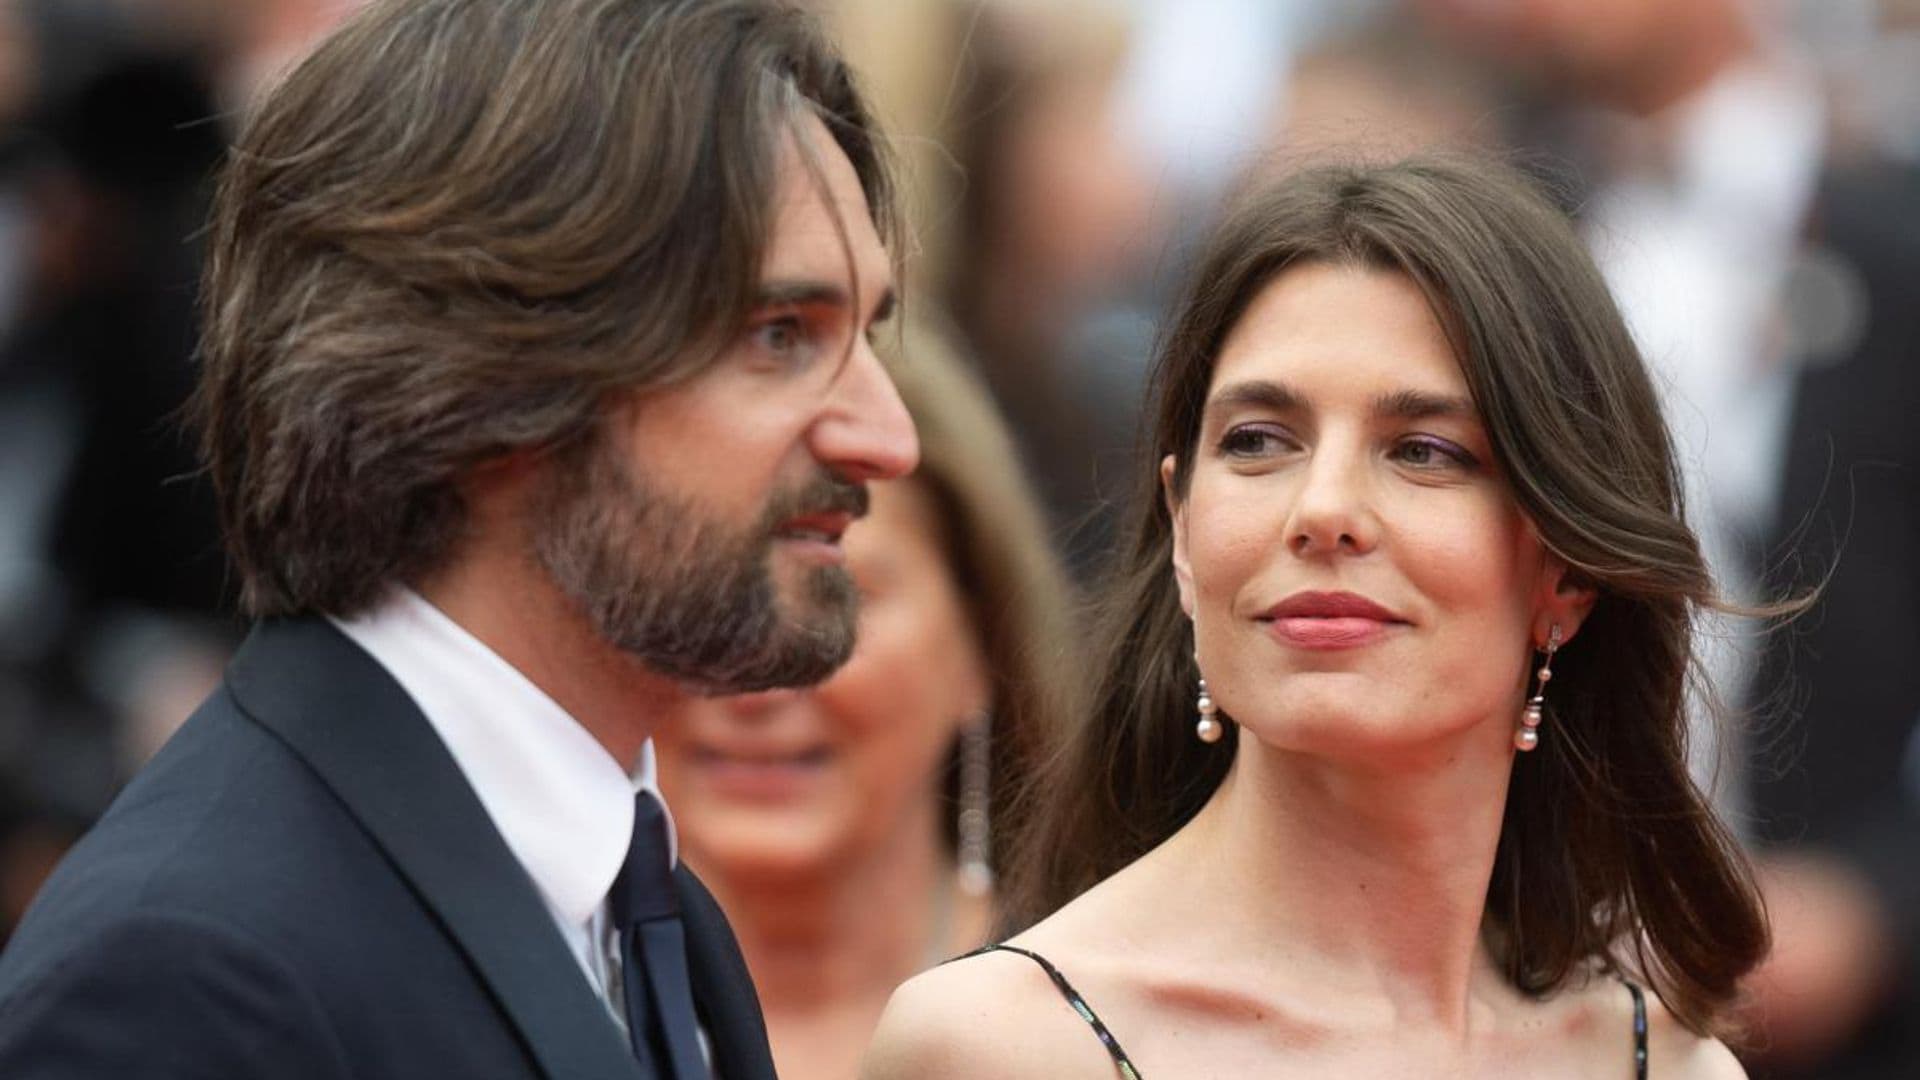 Charlotte Casiraghi's mom and mother-in-law step out together in Cannes